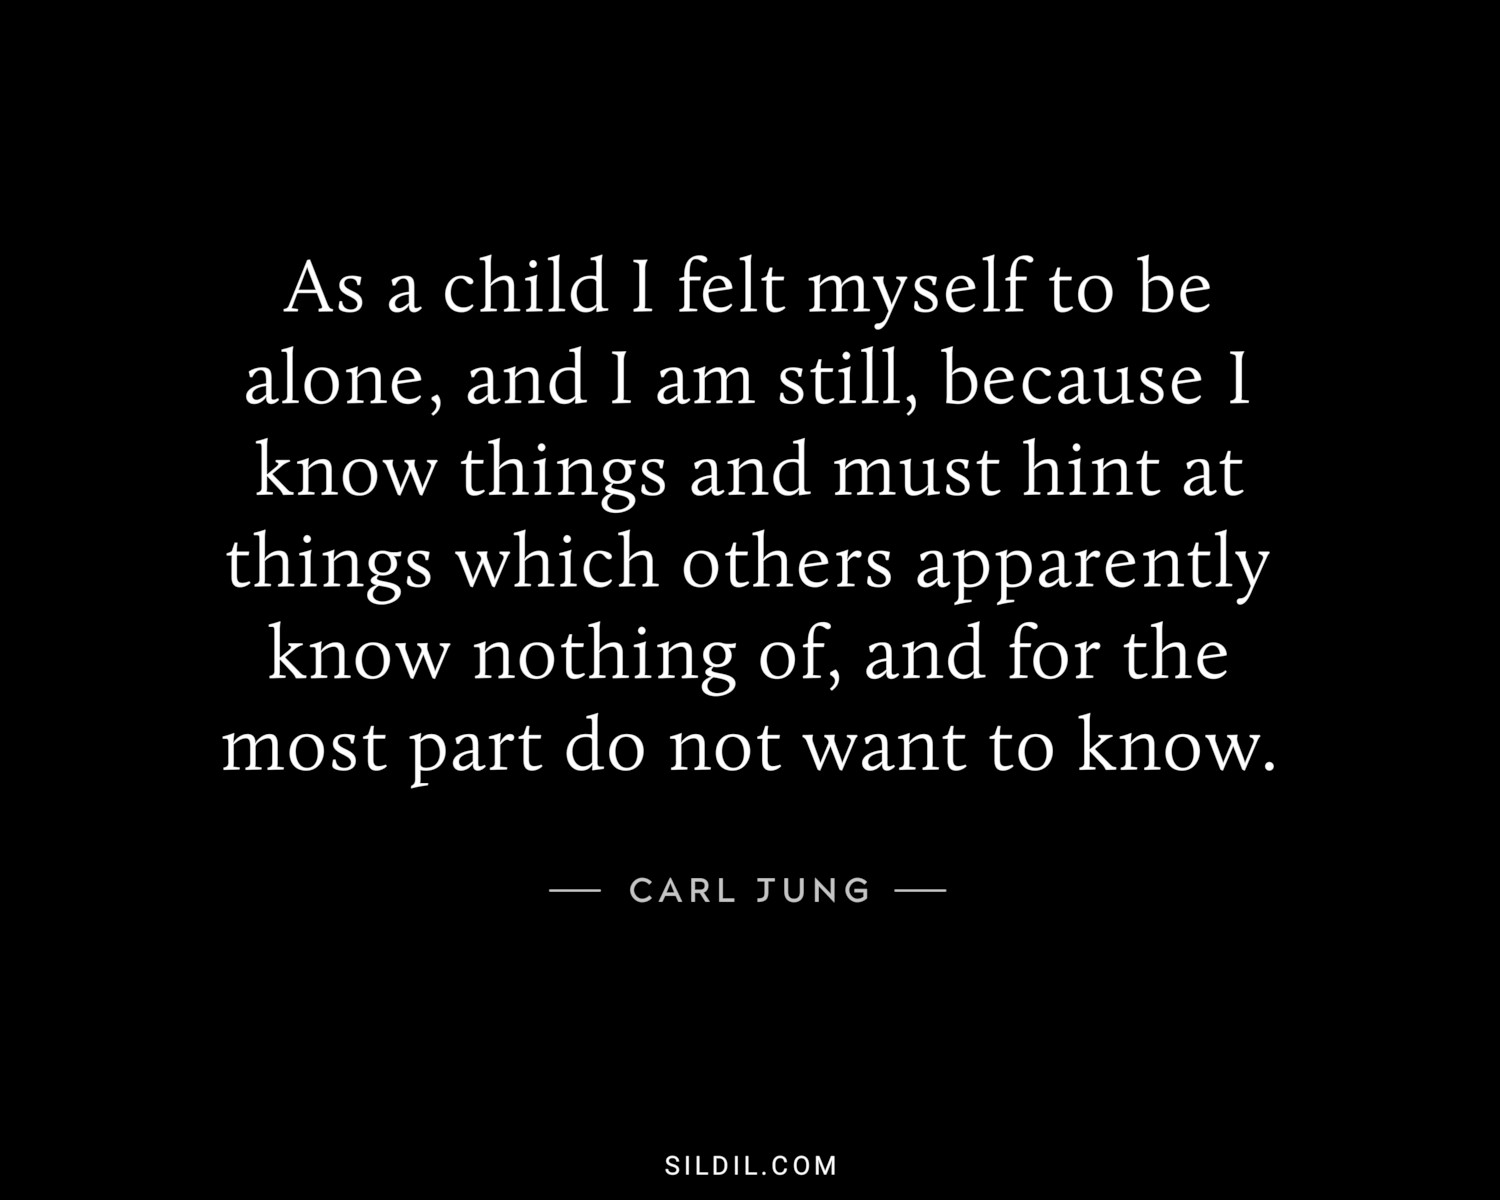 As a child I felt myself to be alone, and I am still, because I know things and must hint at things which others apparently know nothing of, and for the most part do not want to know.